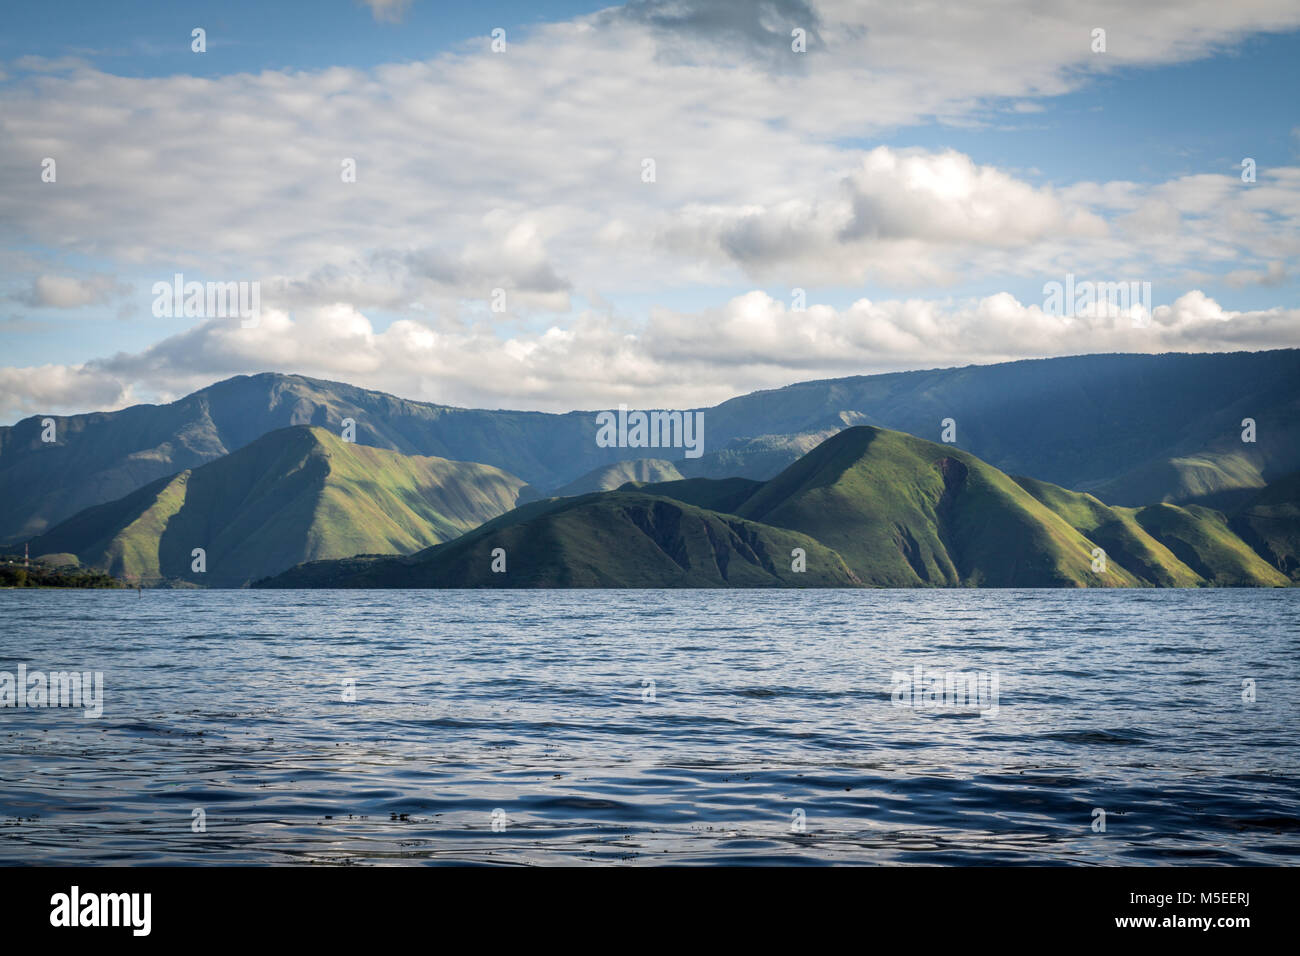 Majestic landscape and scenery from far lake shore of the volcanic crater Lake Toba. Green mountains seen from water surface low angle view of nature Stock Photo